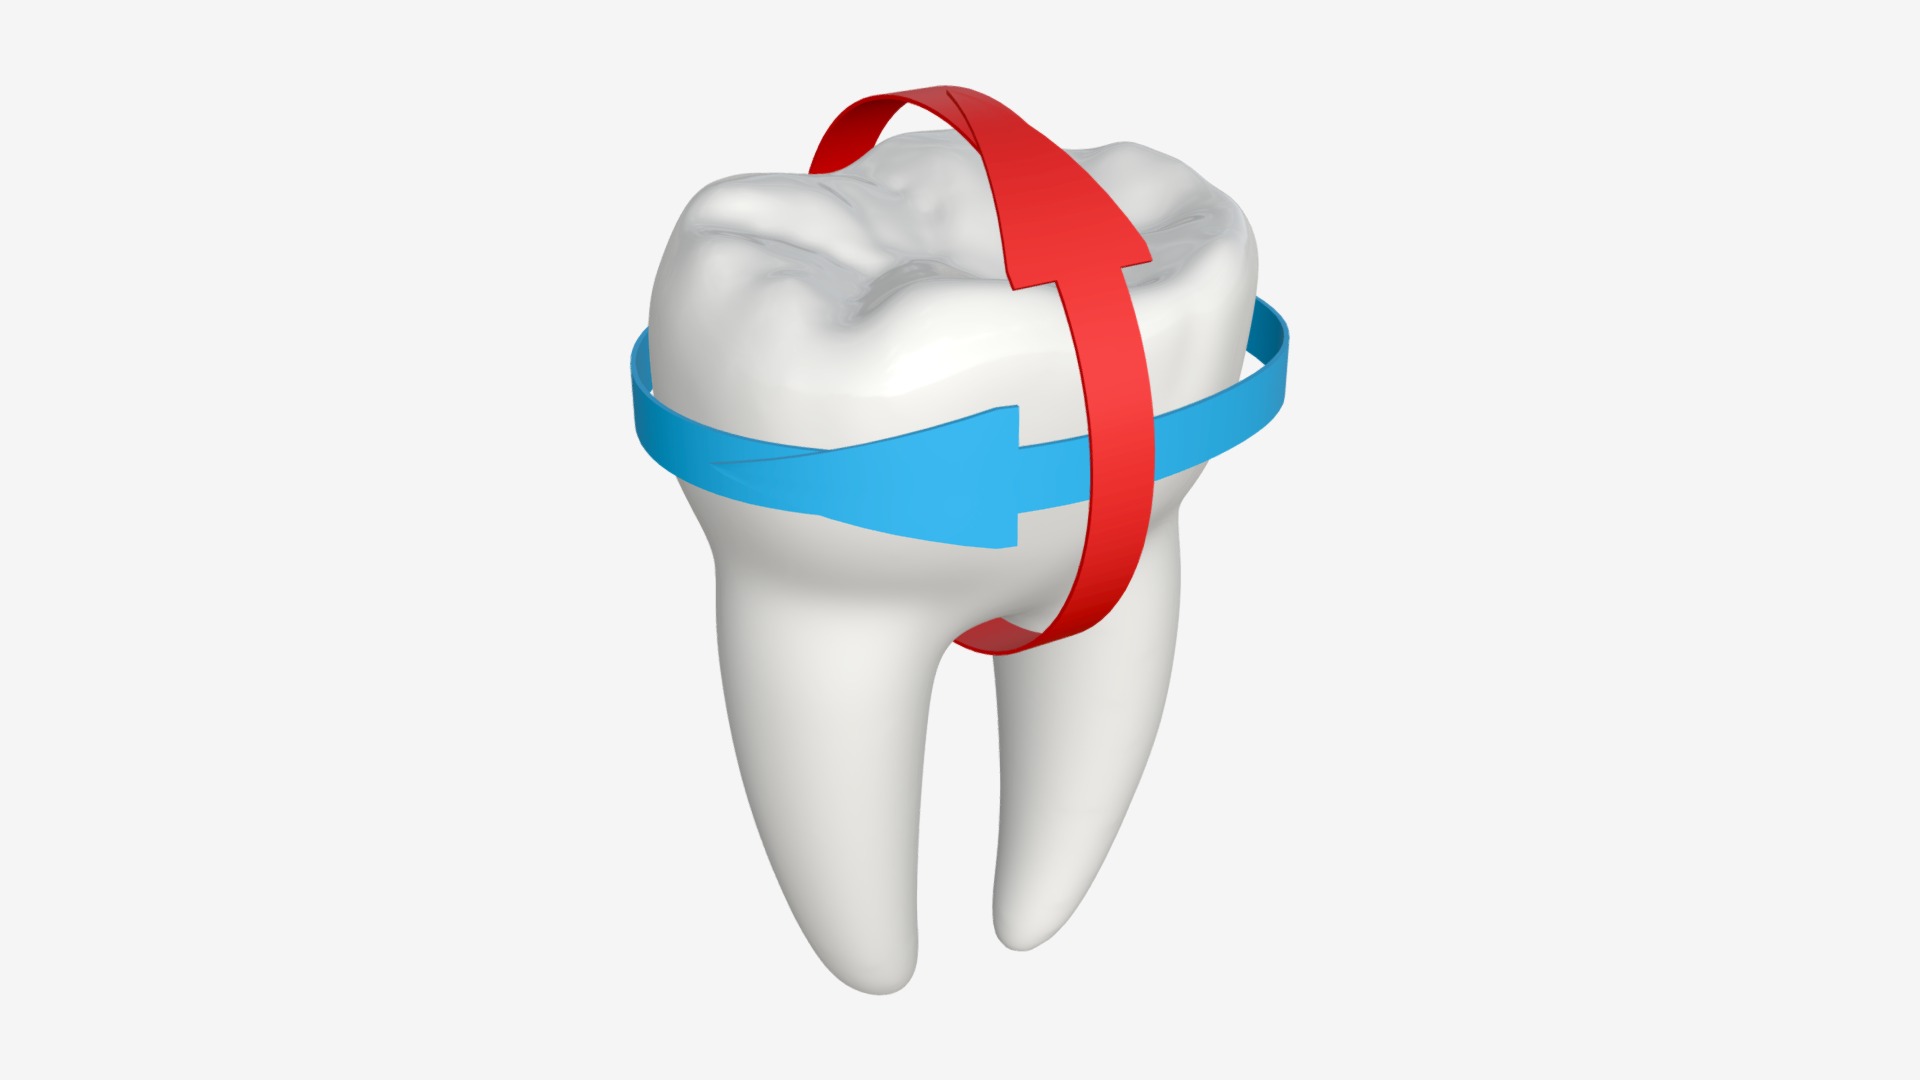 3D model Tooth molars with arrows 01 - This is a 3D model of the Tooth molars with arrows 01. The 3D model is about a white and blue logo.